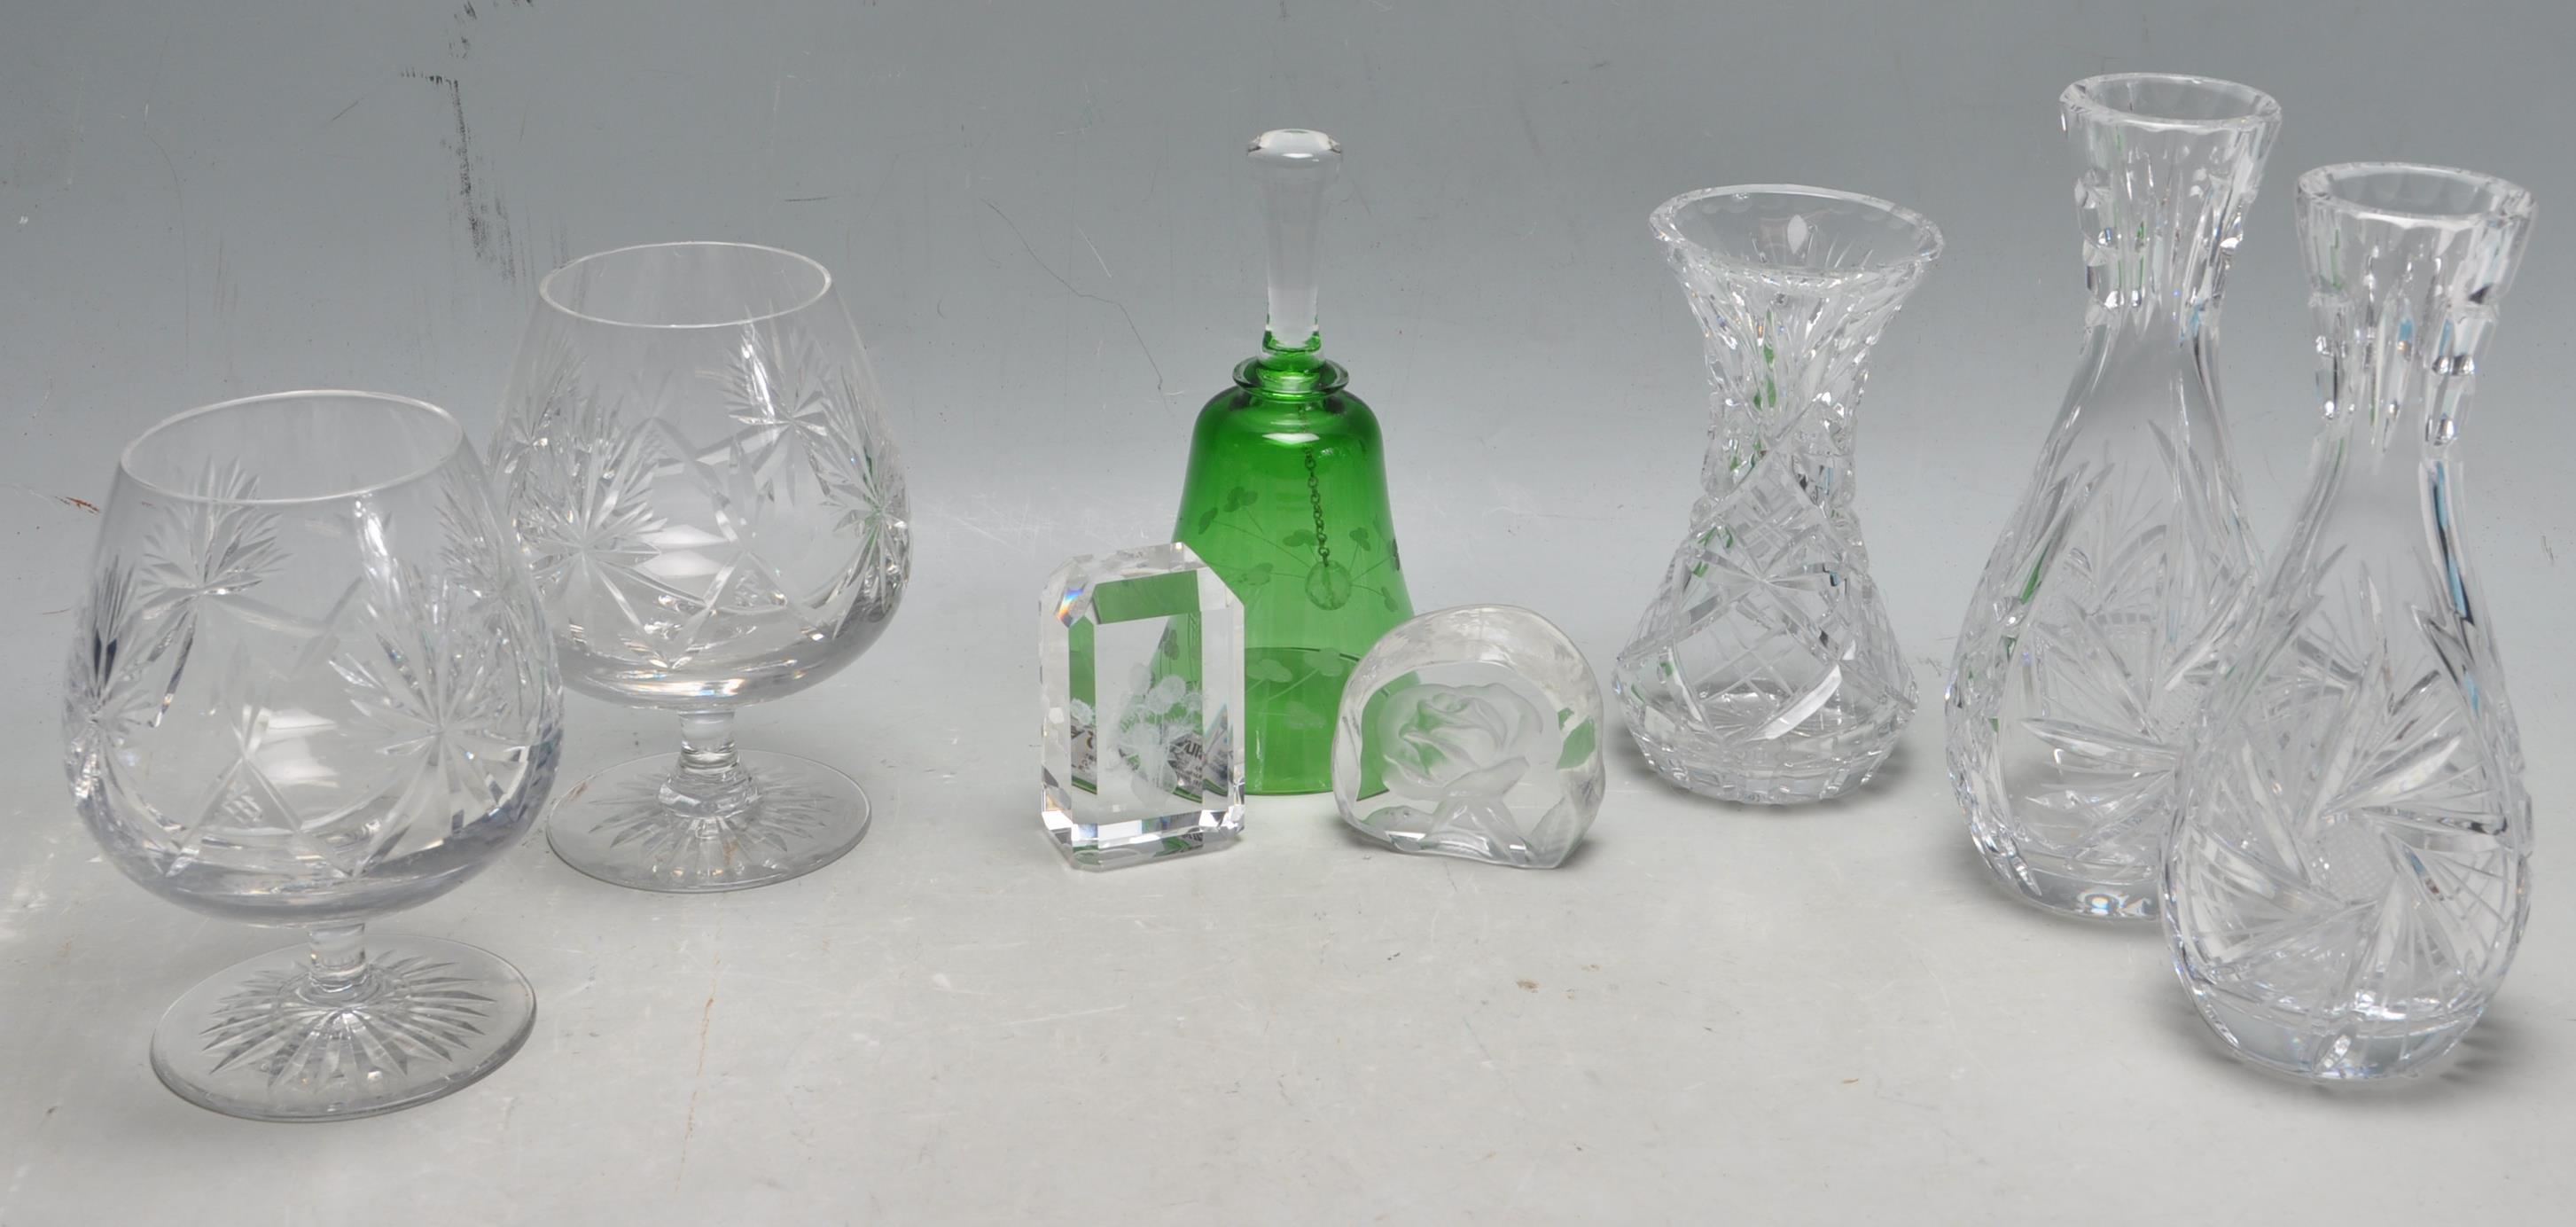 A COLLECTION OF VINTAGE 20TH CENTURY GLASS WARE